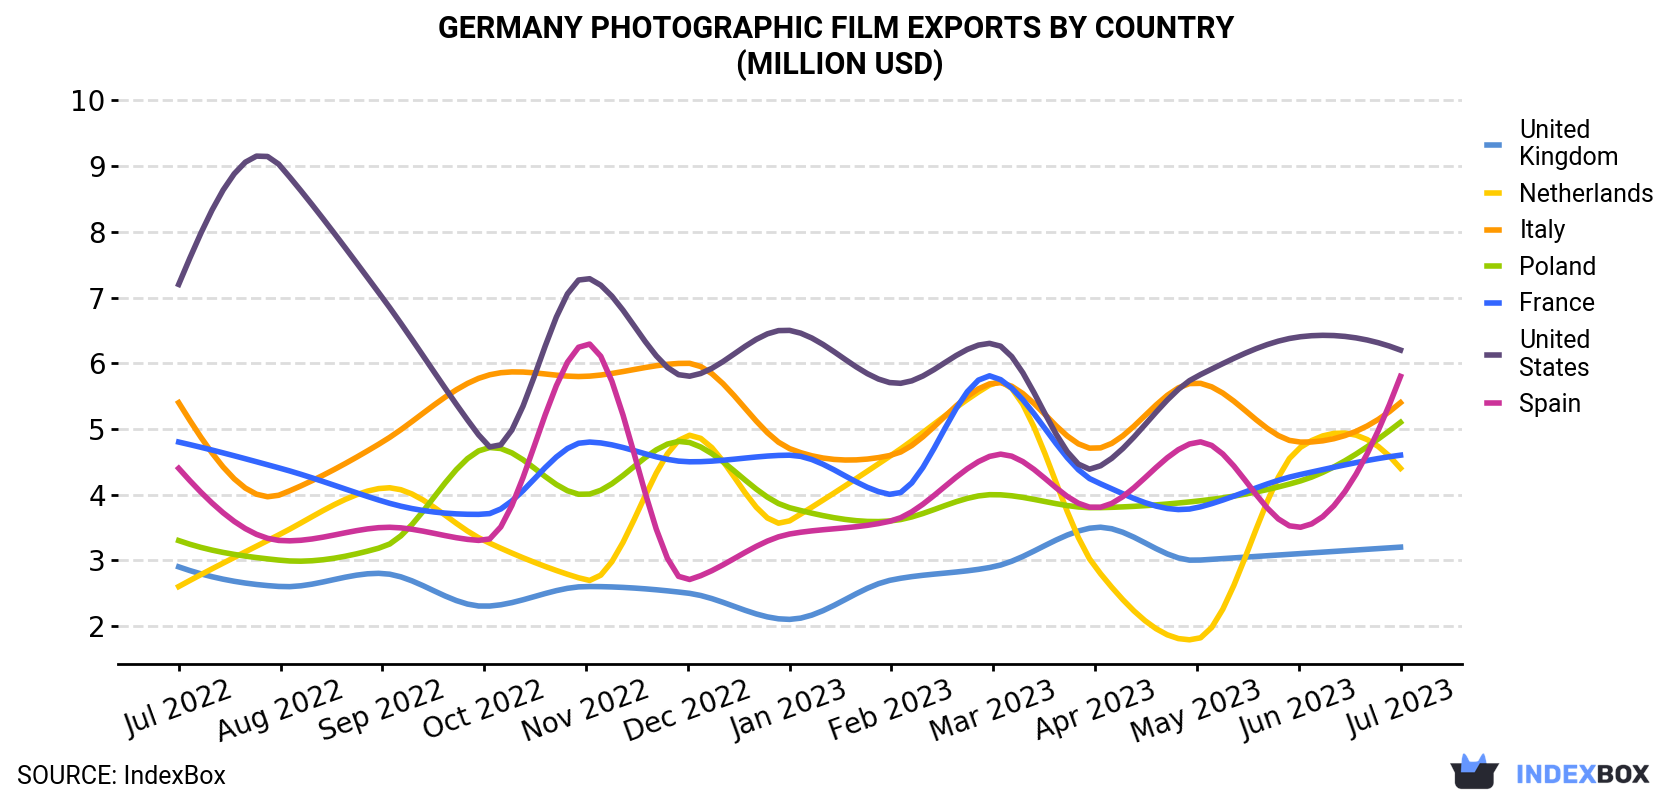 Germany Photographic Film Exports By Country (Million USD)